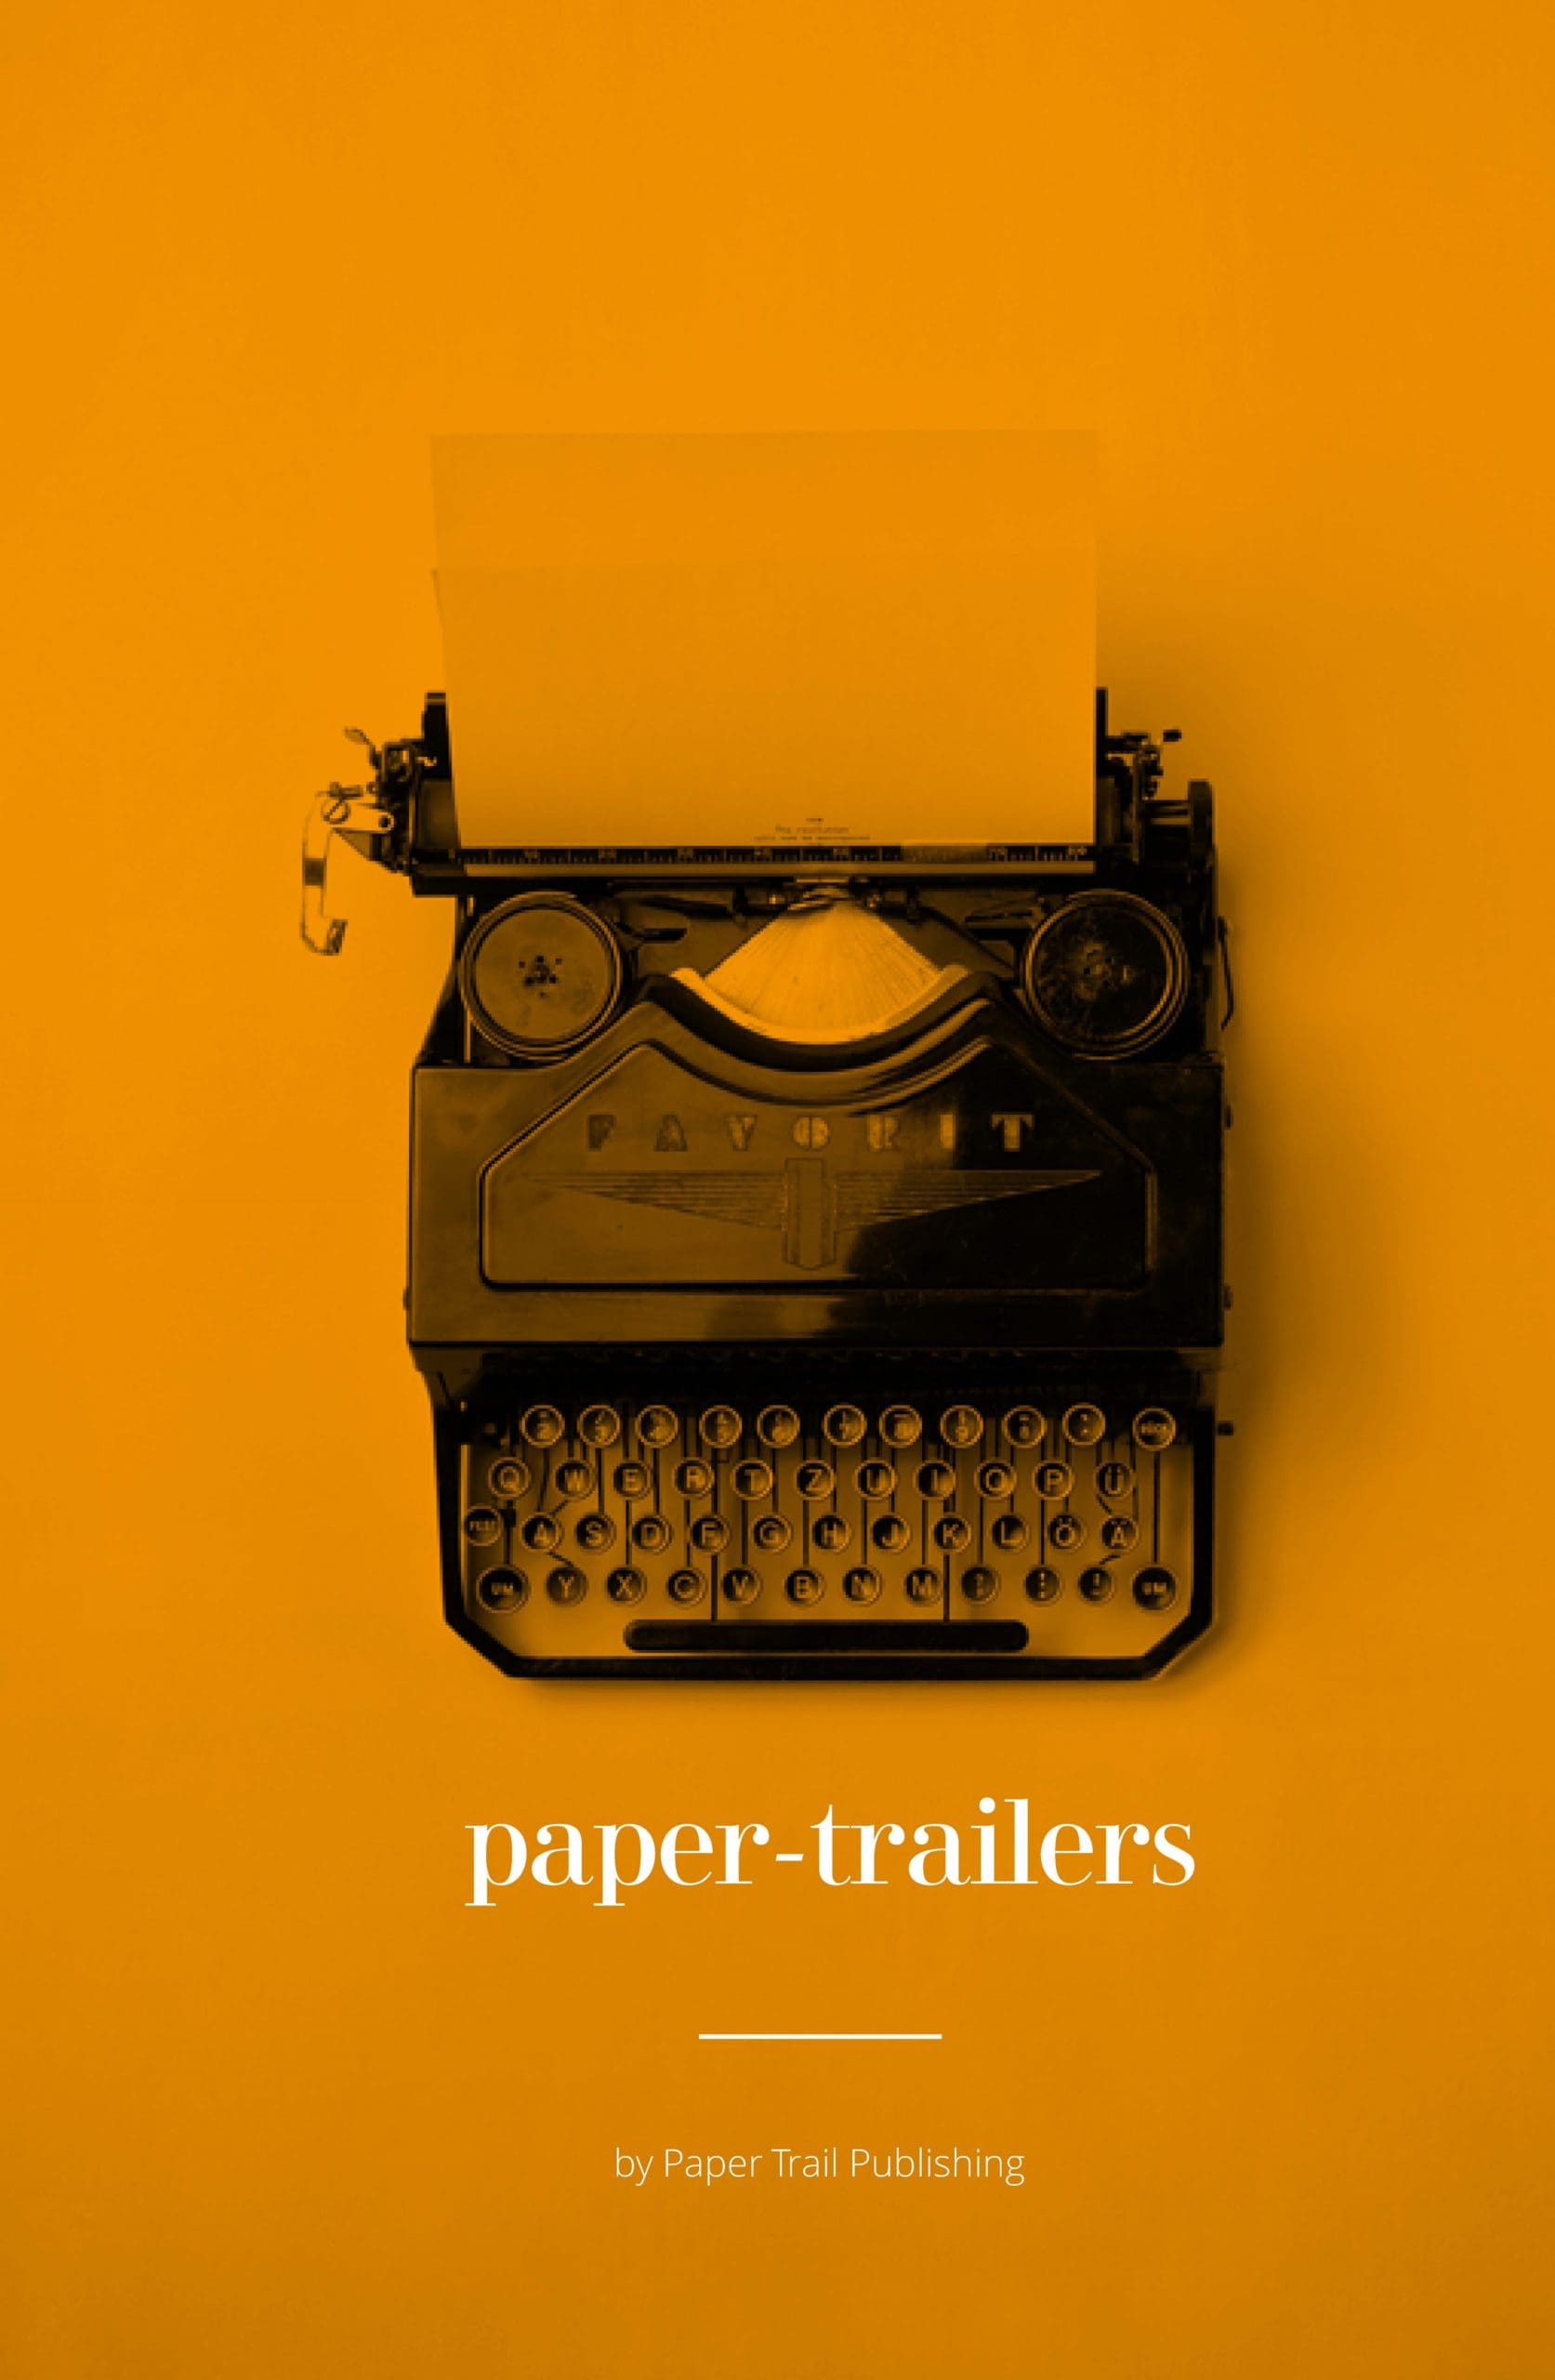 Paper-Trailers - read about Training with Paper Trail